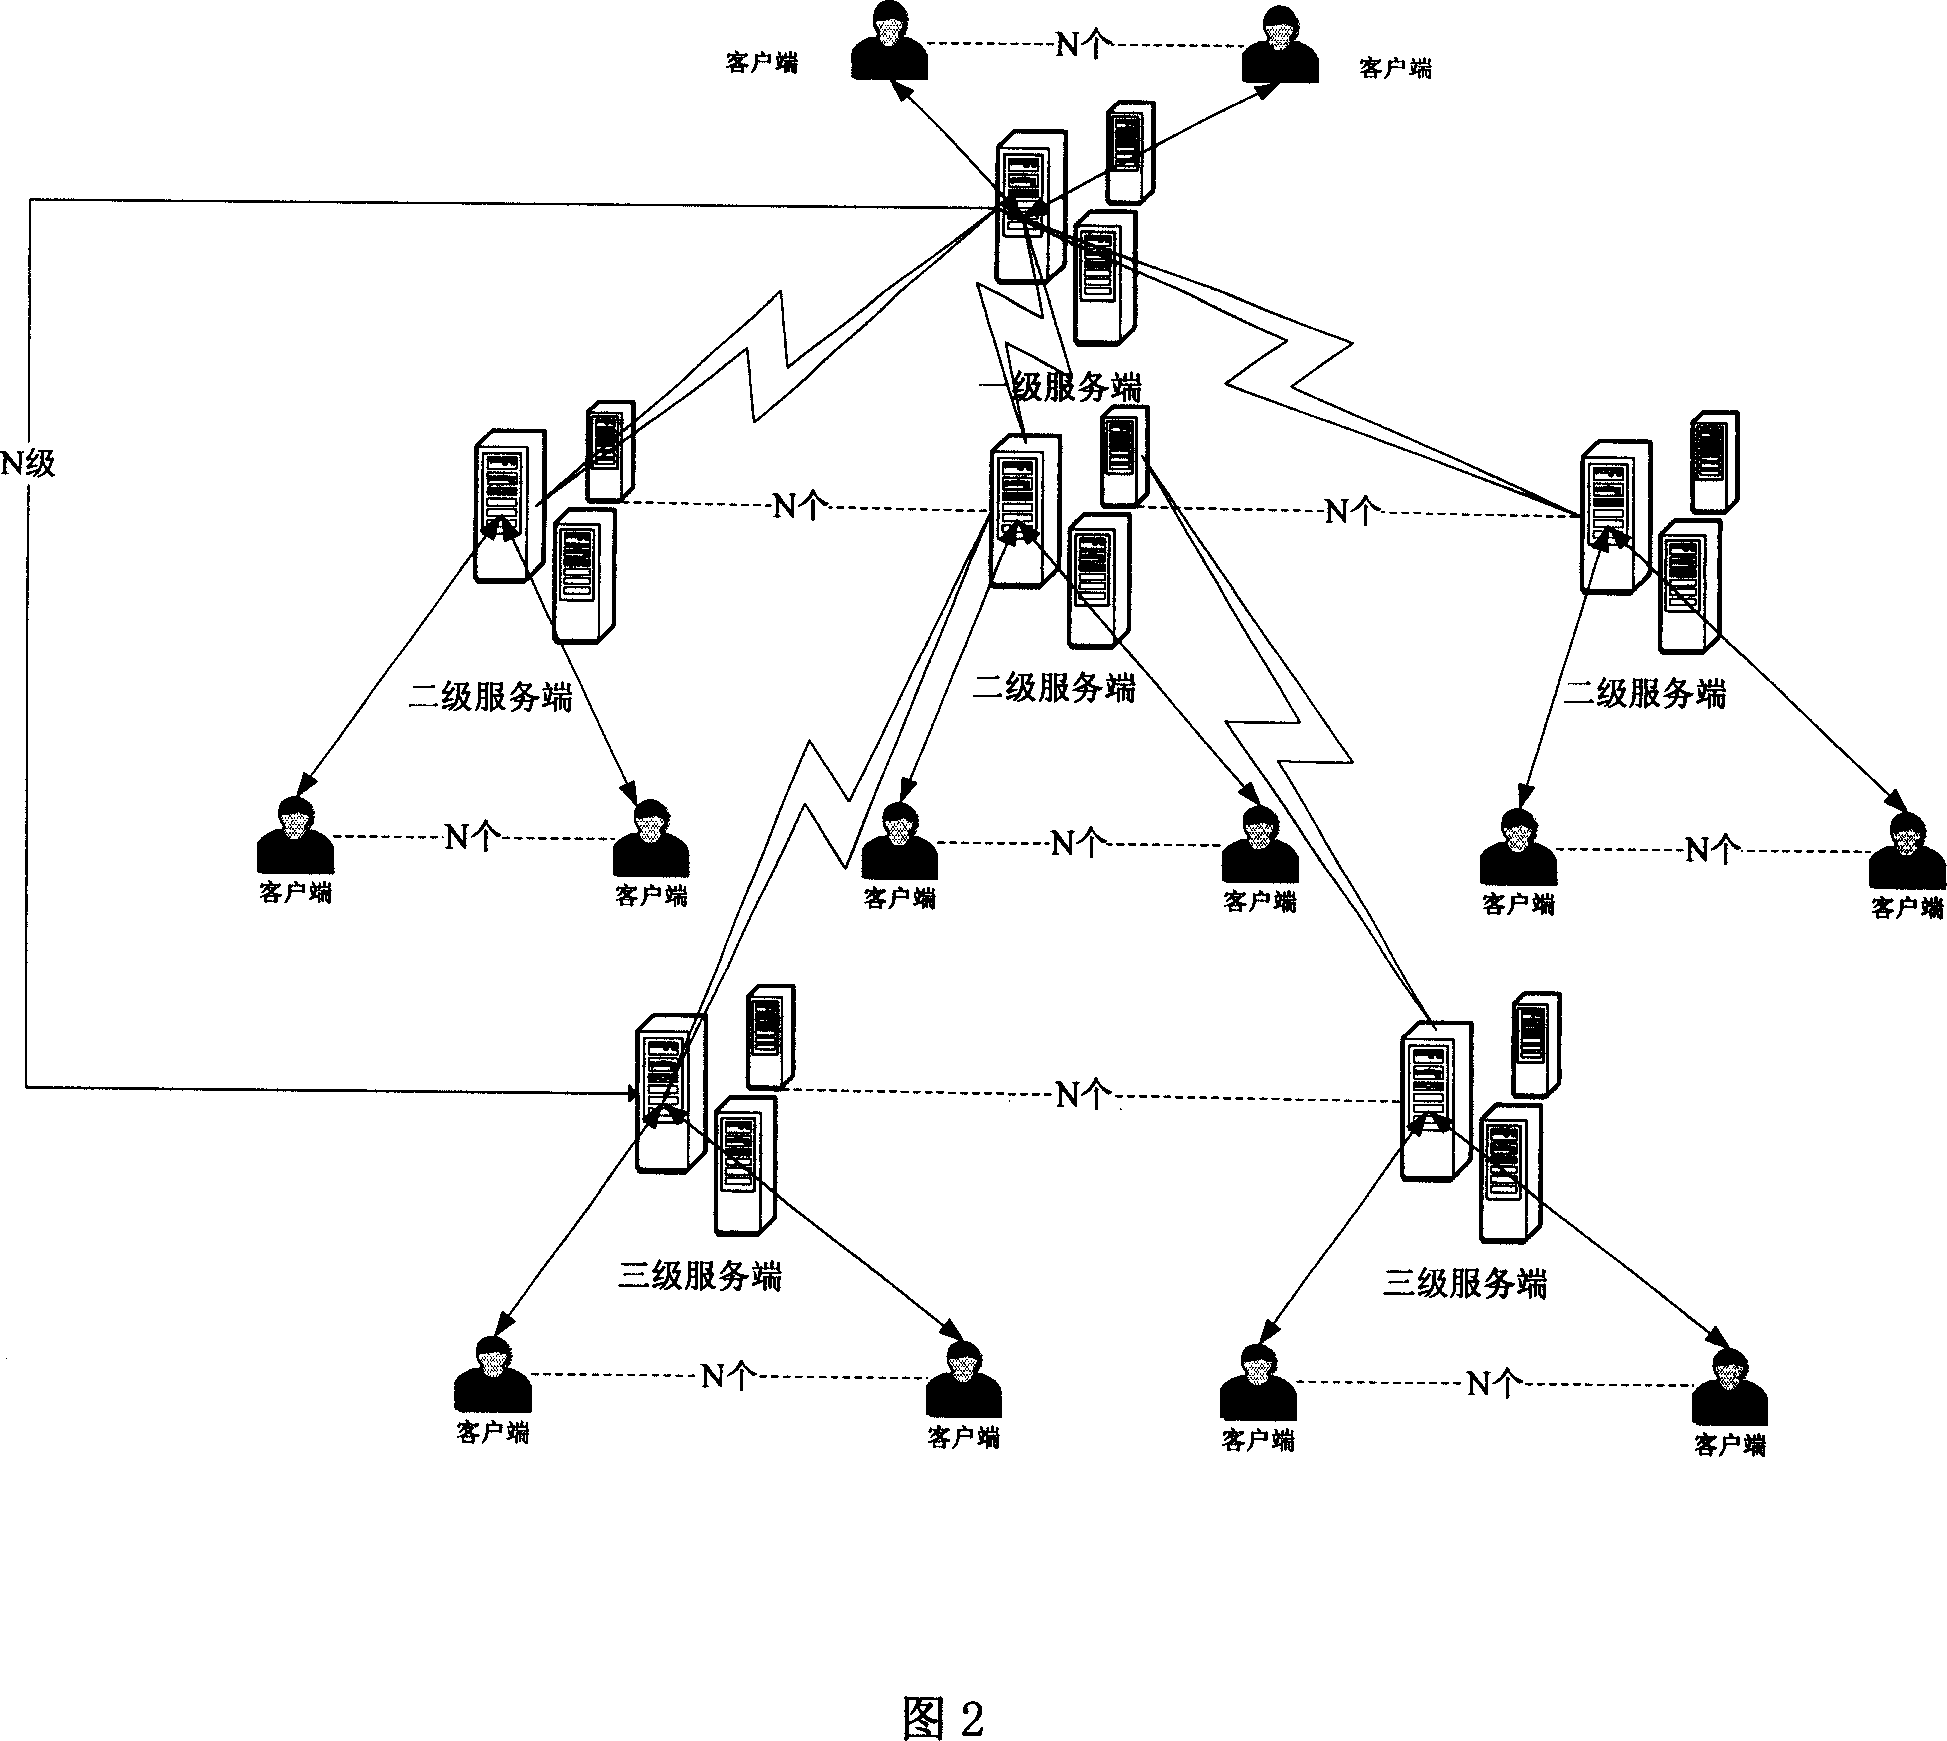 Tree layering structure conference system and conference organization method